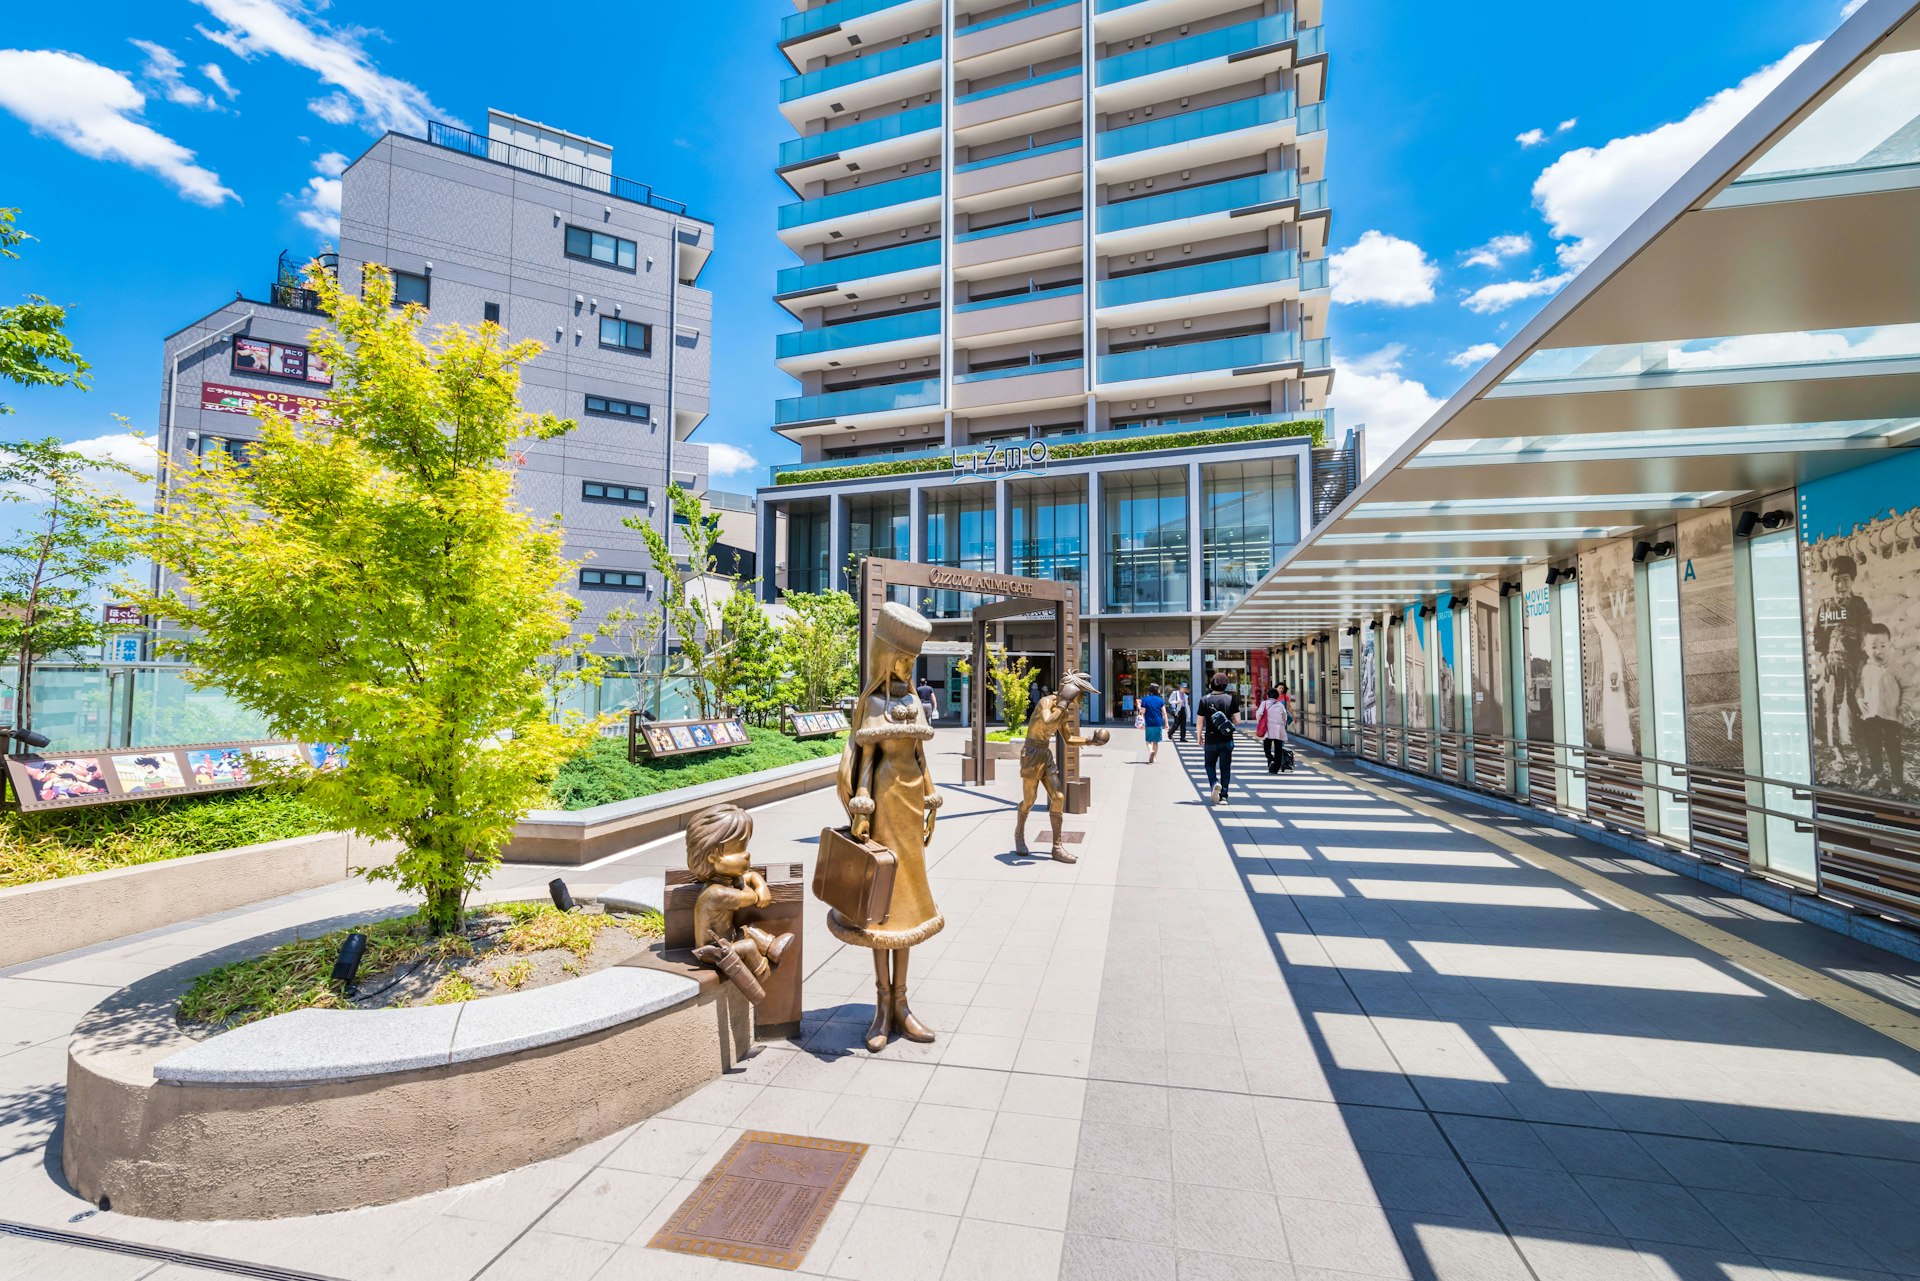 "Oizumi Anime Gate" in front of "Oizumi Gakuen" station. A bronze statue of an animated work is displayed. "Oizumi" is the birthplace of Japanese animation